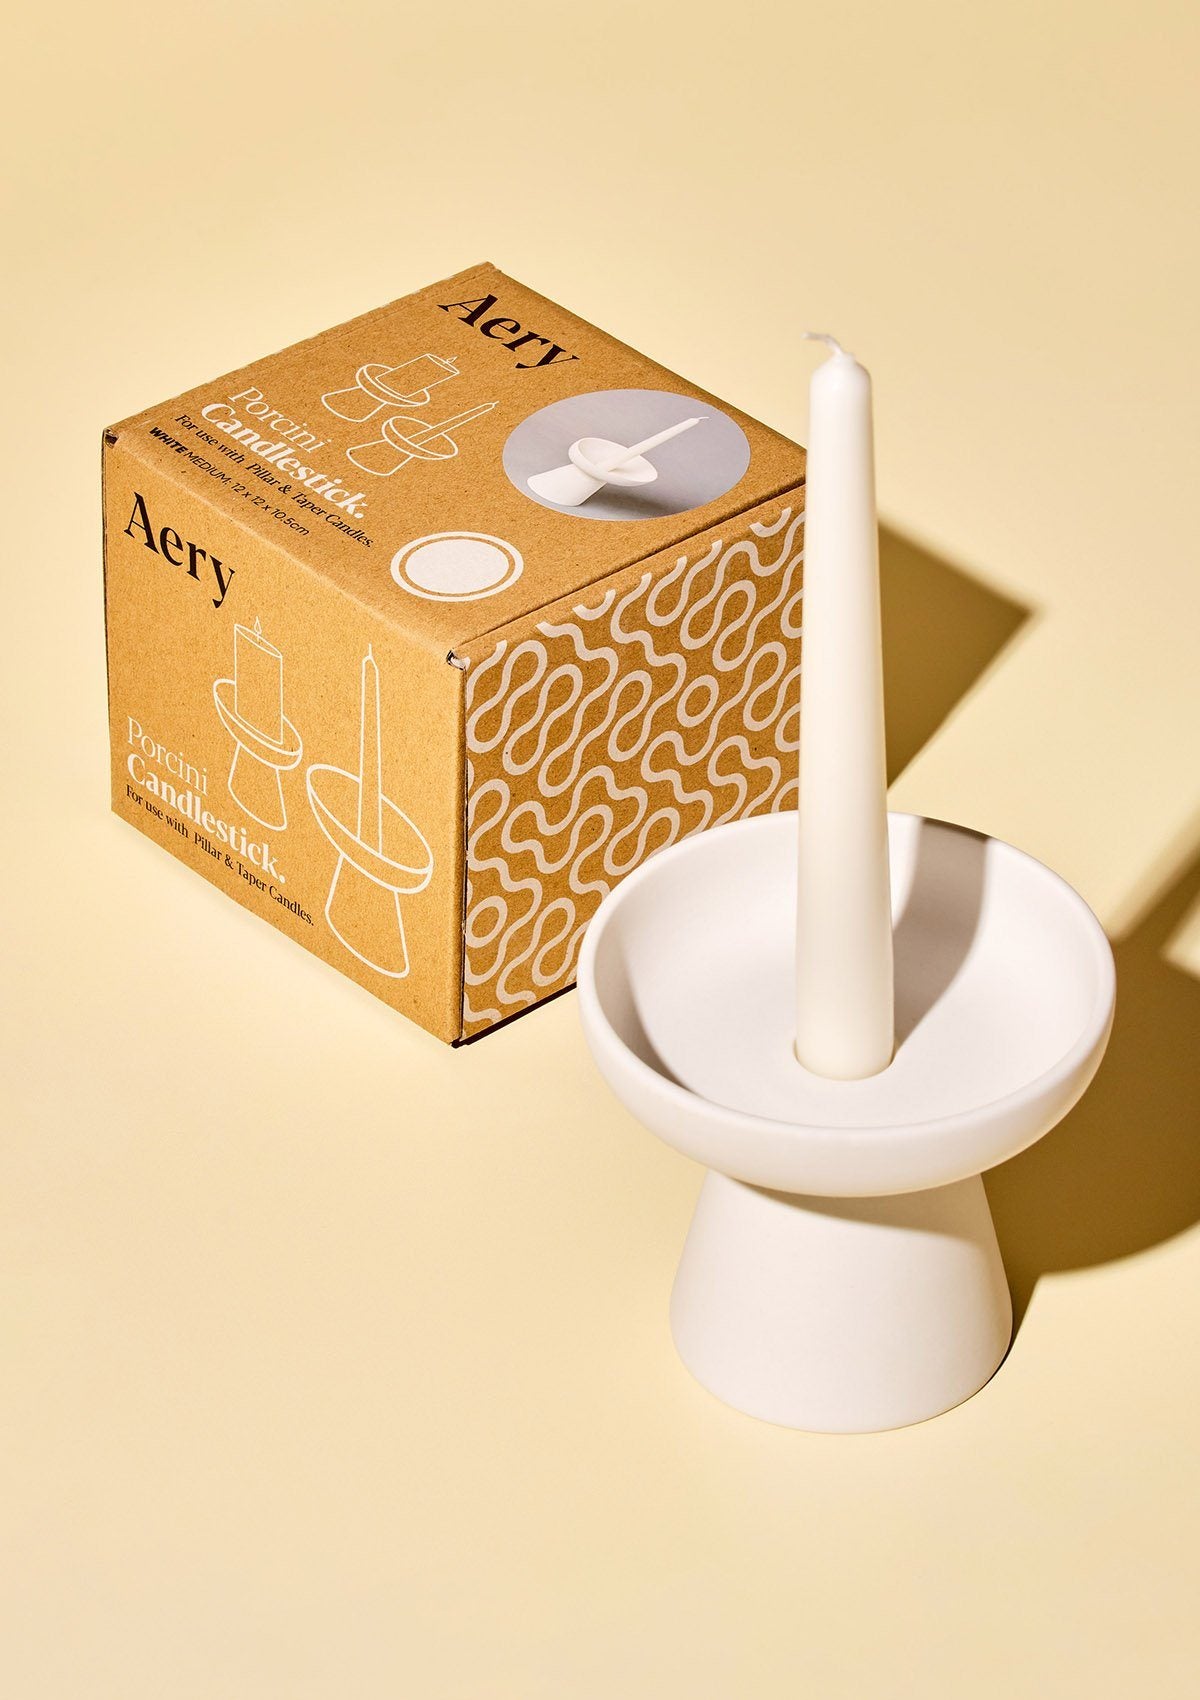 aery living white ceramic candle holder displayed with tapered white candle next to product packaging against a yellow background